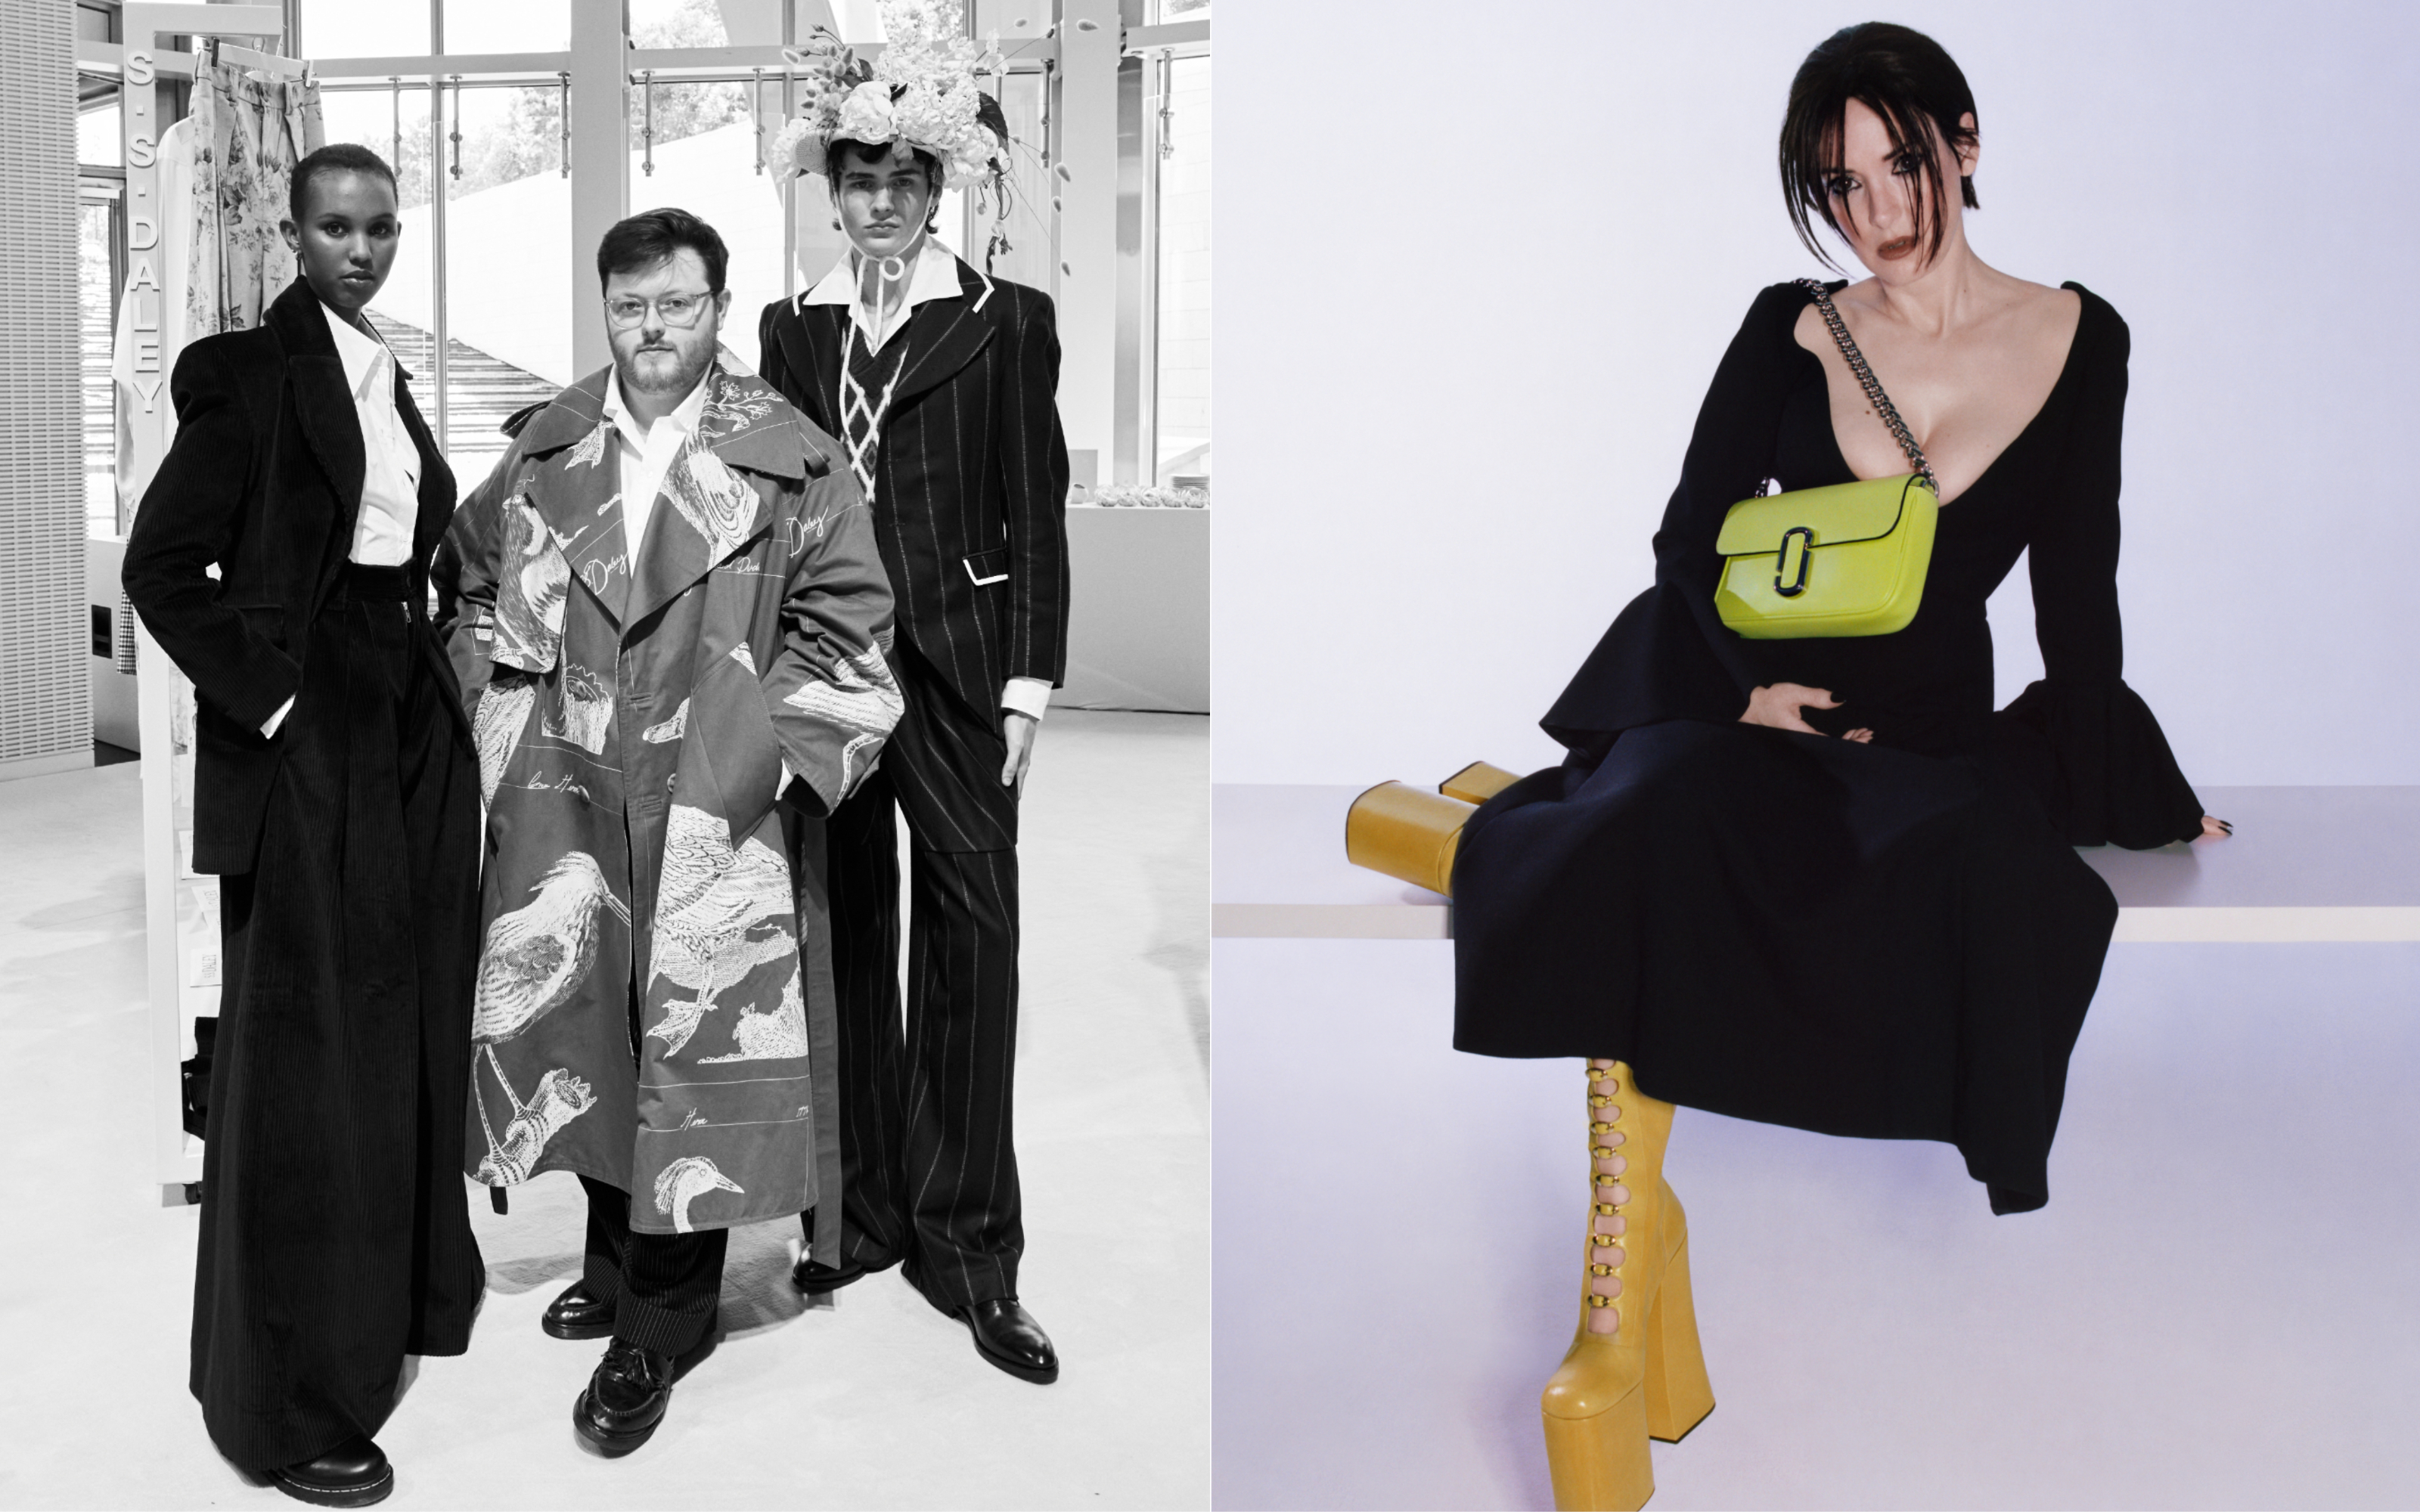 KING OF COLLABORATIONS: HOW MARC JACOBS OPENED LOUIS VUITTON UP TO